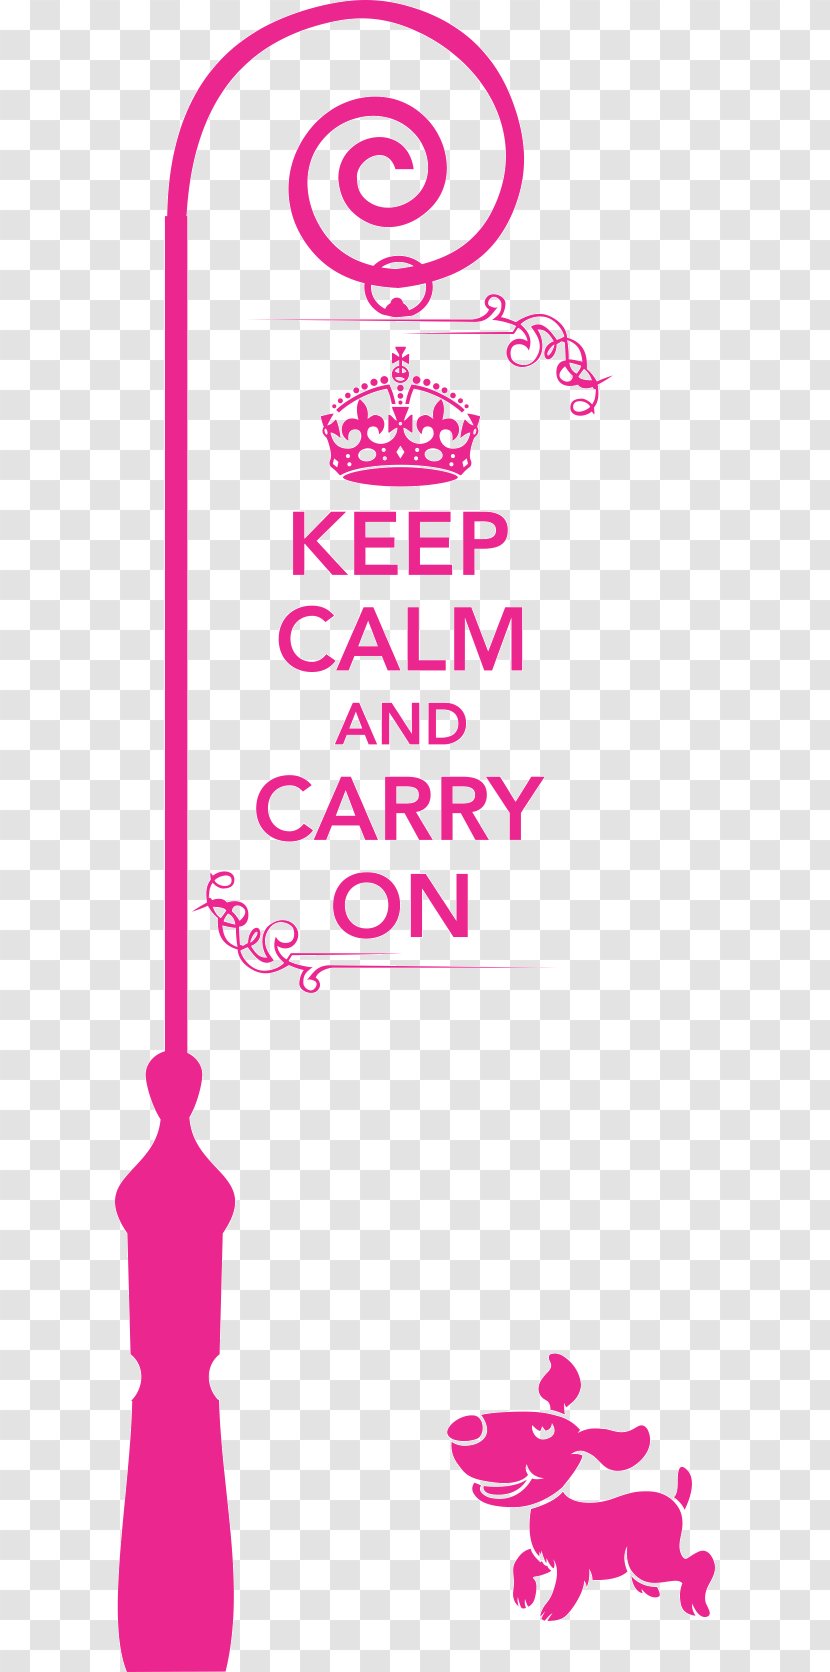 Keep Calm And Carry On Clip Art Paper Adhesive Design - Text - Banco Border Transparent PNG